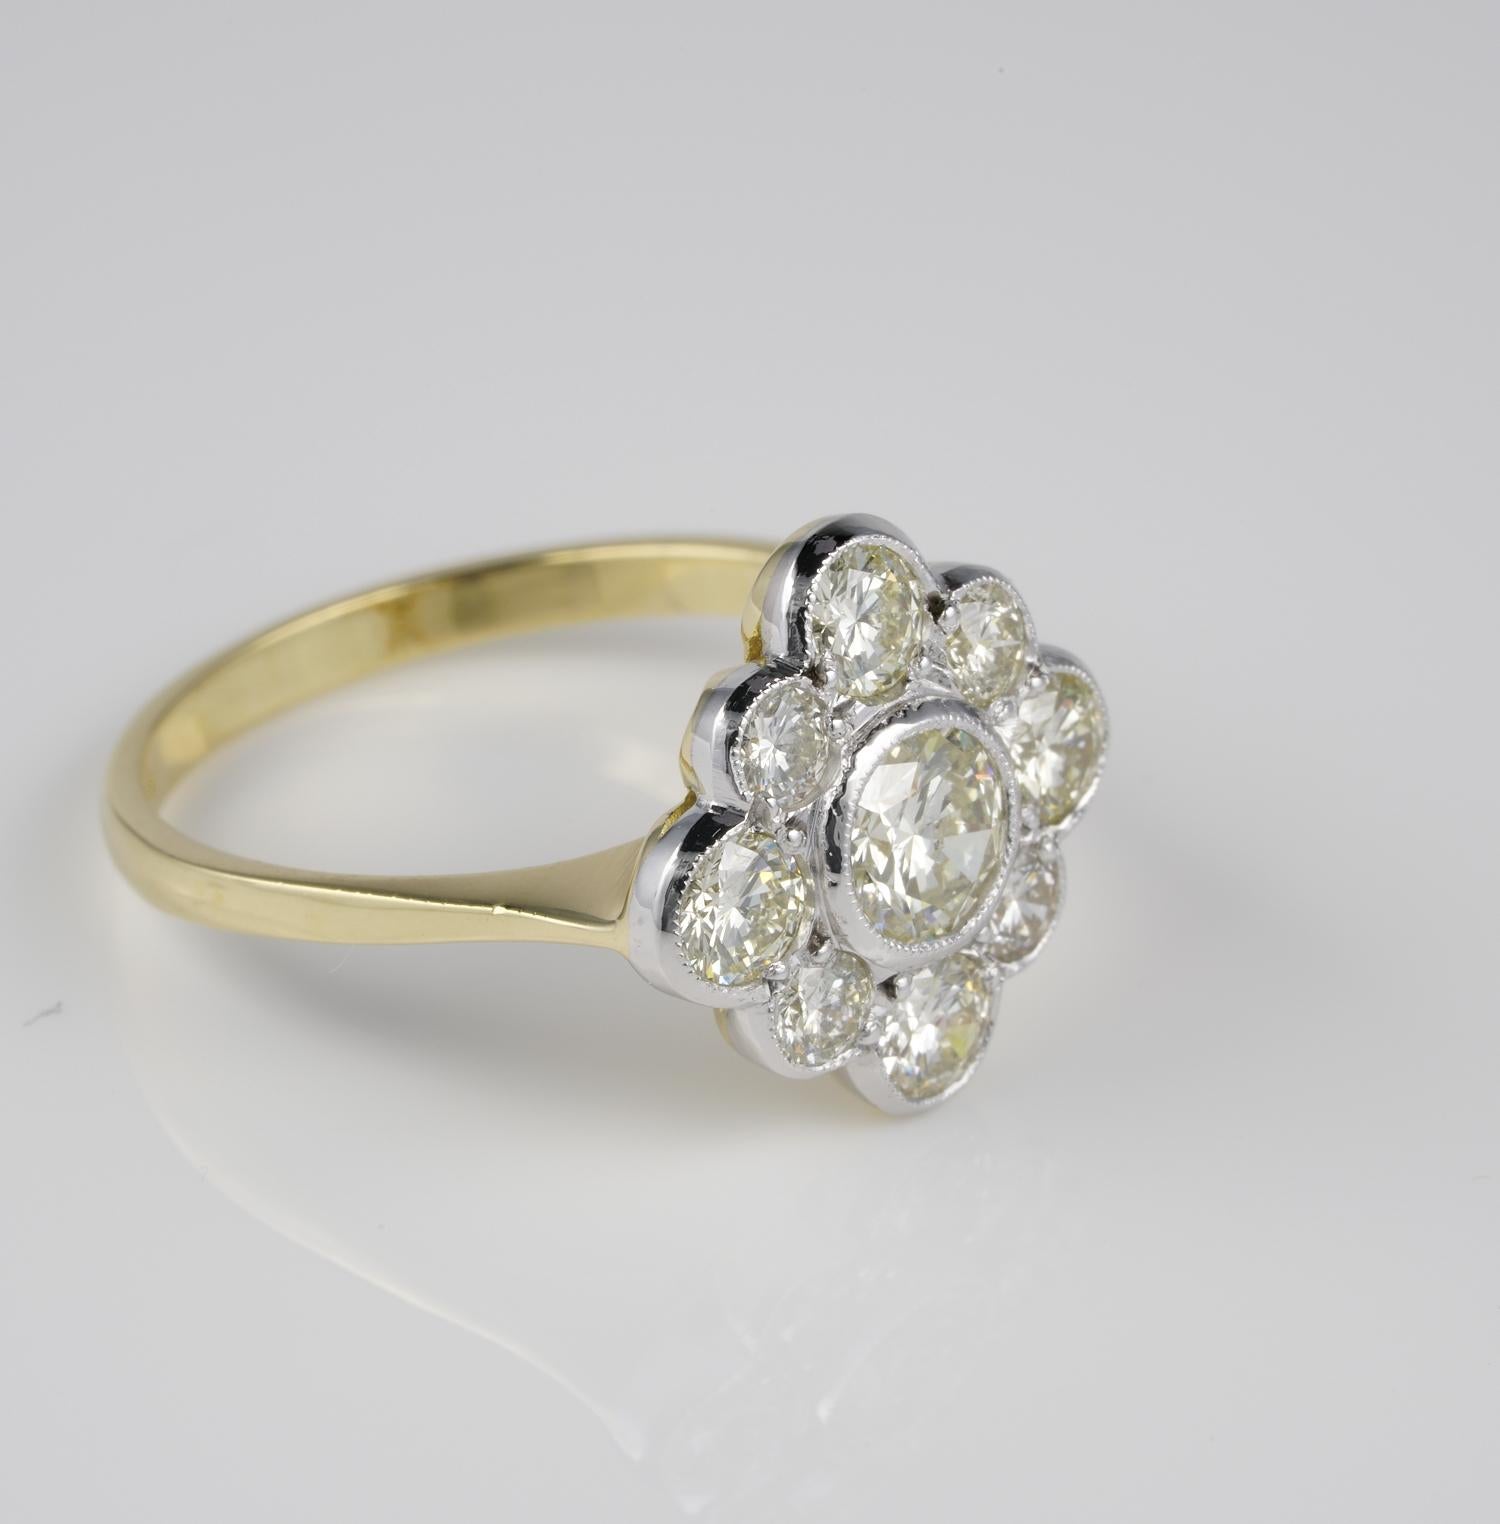 A Burst of Diamonds
Very charming old cluster ring boasts fine hand crafting in combination with high degree old transitional Brilliant cut Diamonds
Low profile for the crown which is Platinum made backed with 18 KT gold -stamped
Perfect engagement